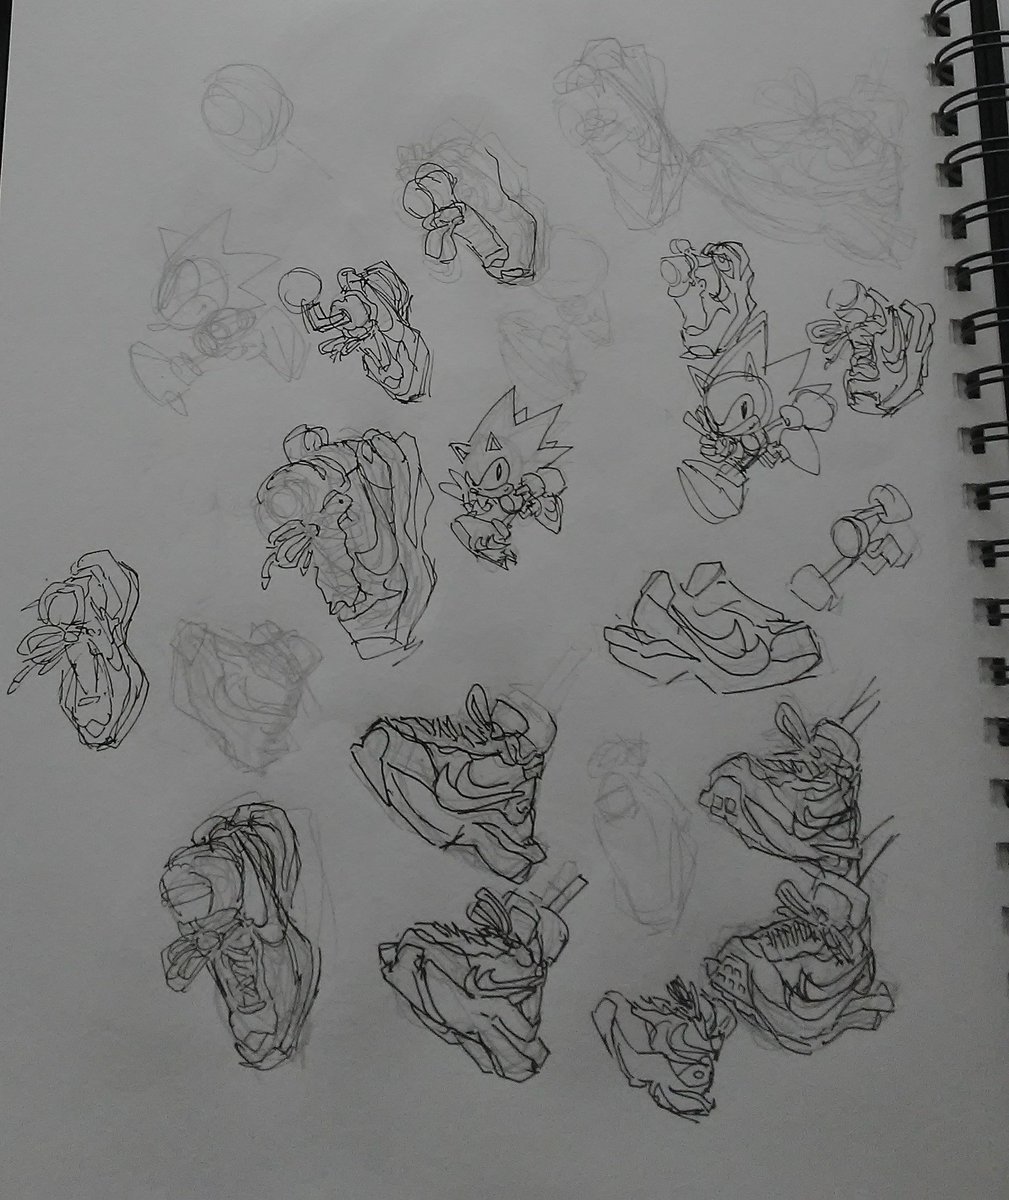 Here's a workthru because haha drawing shoes is really easy right 